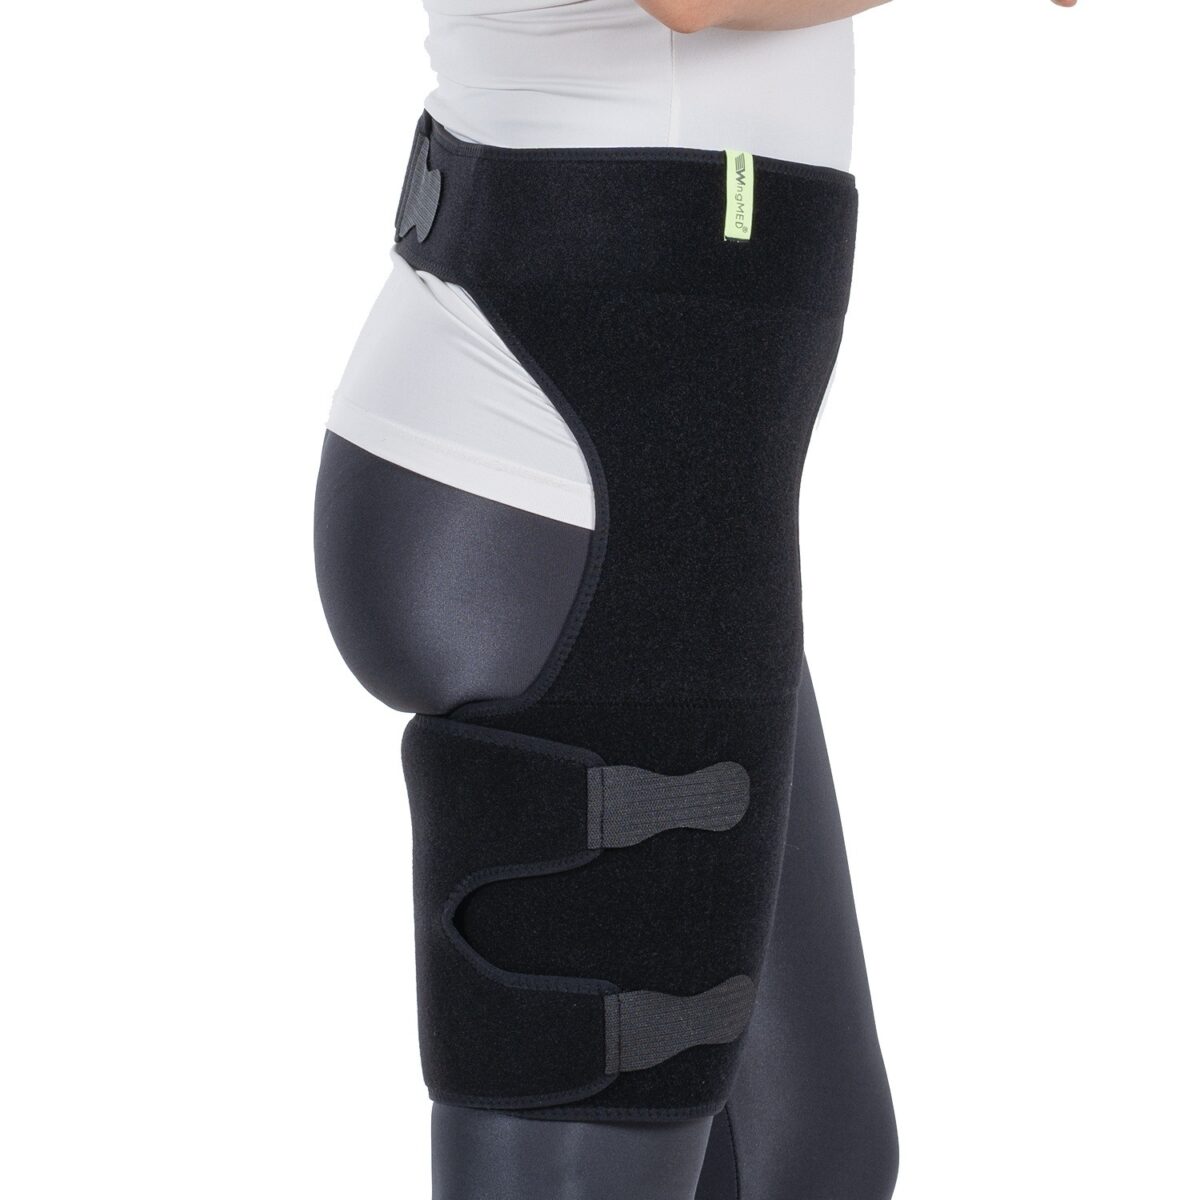 wingmed orthopedic equipments W530 thigh support with belt 27